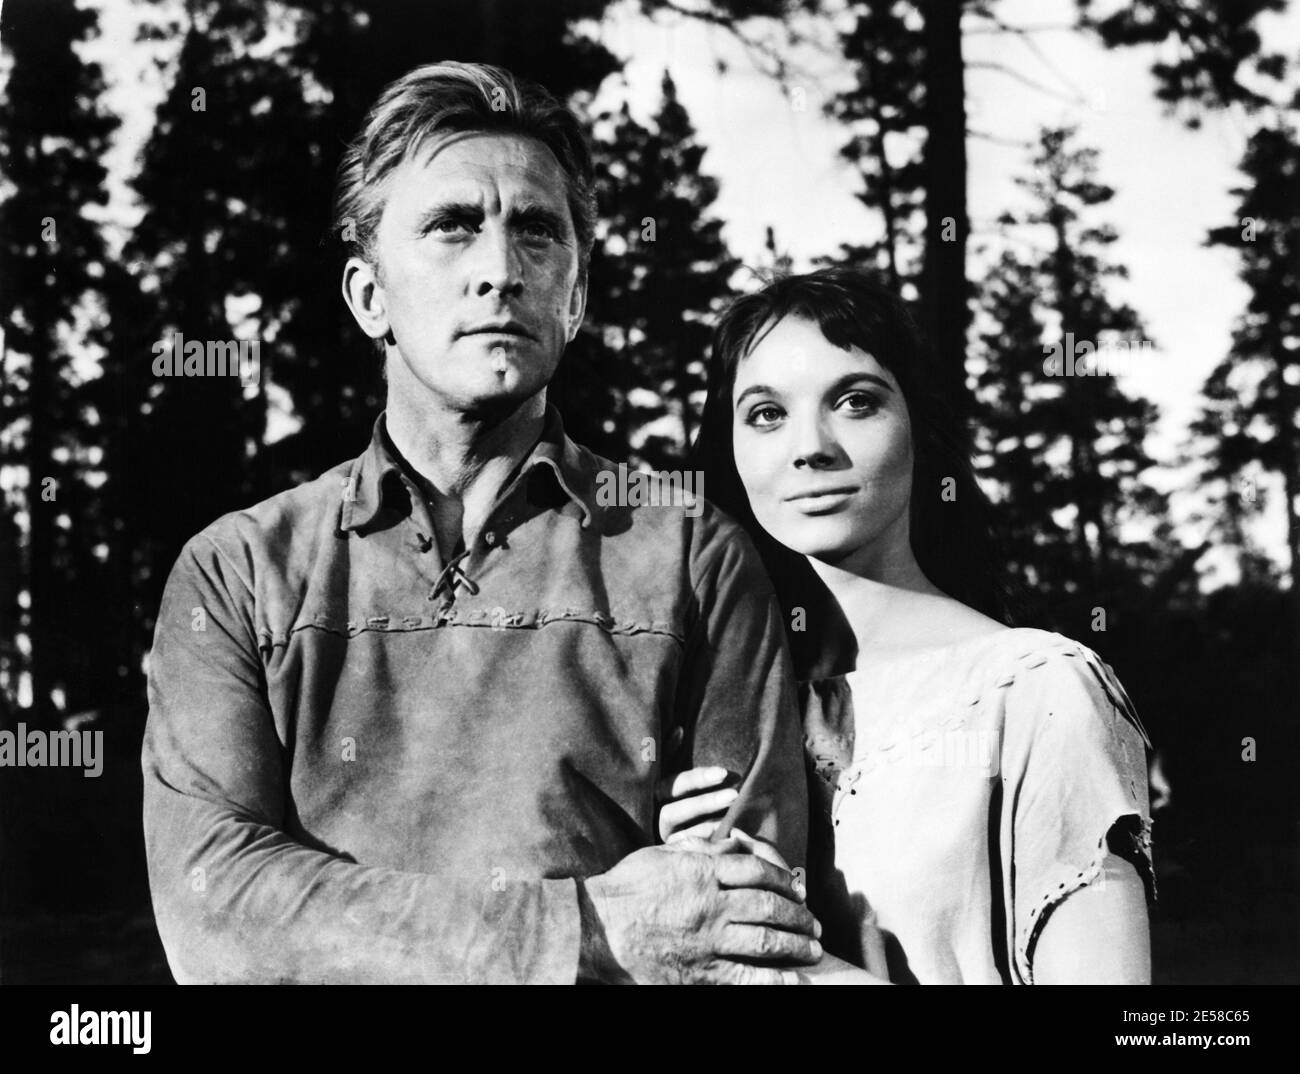 1955 , USA :  The italian actress  ELSA  MARTINELLI  ( 1935 - 2017  ) in Hollywood with KIRK DOUGLAS  in the movie THE INDIAN FIGHTER ( Il cacciatore d' indiani ), United Artists Corporation  productions   - portrait - ritratto - CINEMA - FILM  - WESTERN - lovers - amanti - coppia - couple - abbraccio - embrace ----  Archivio GBB Stock Photo